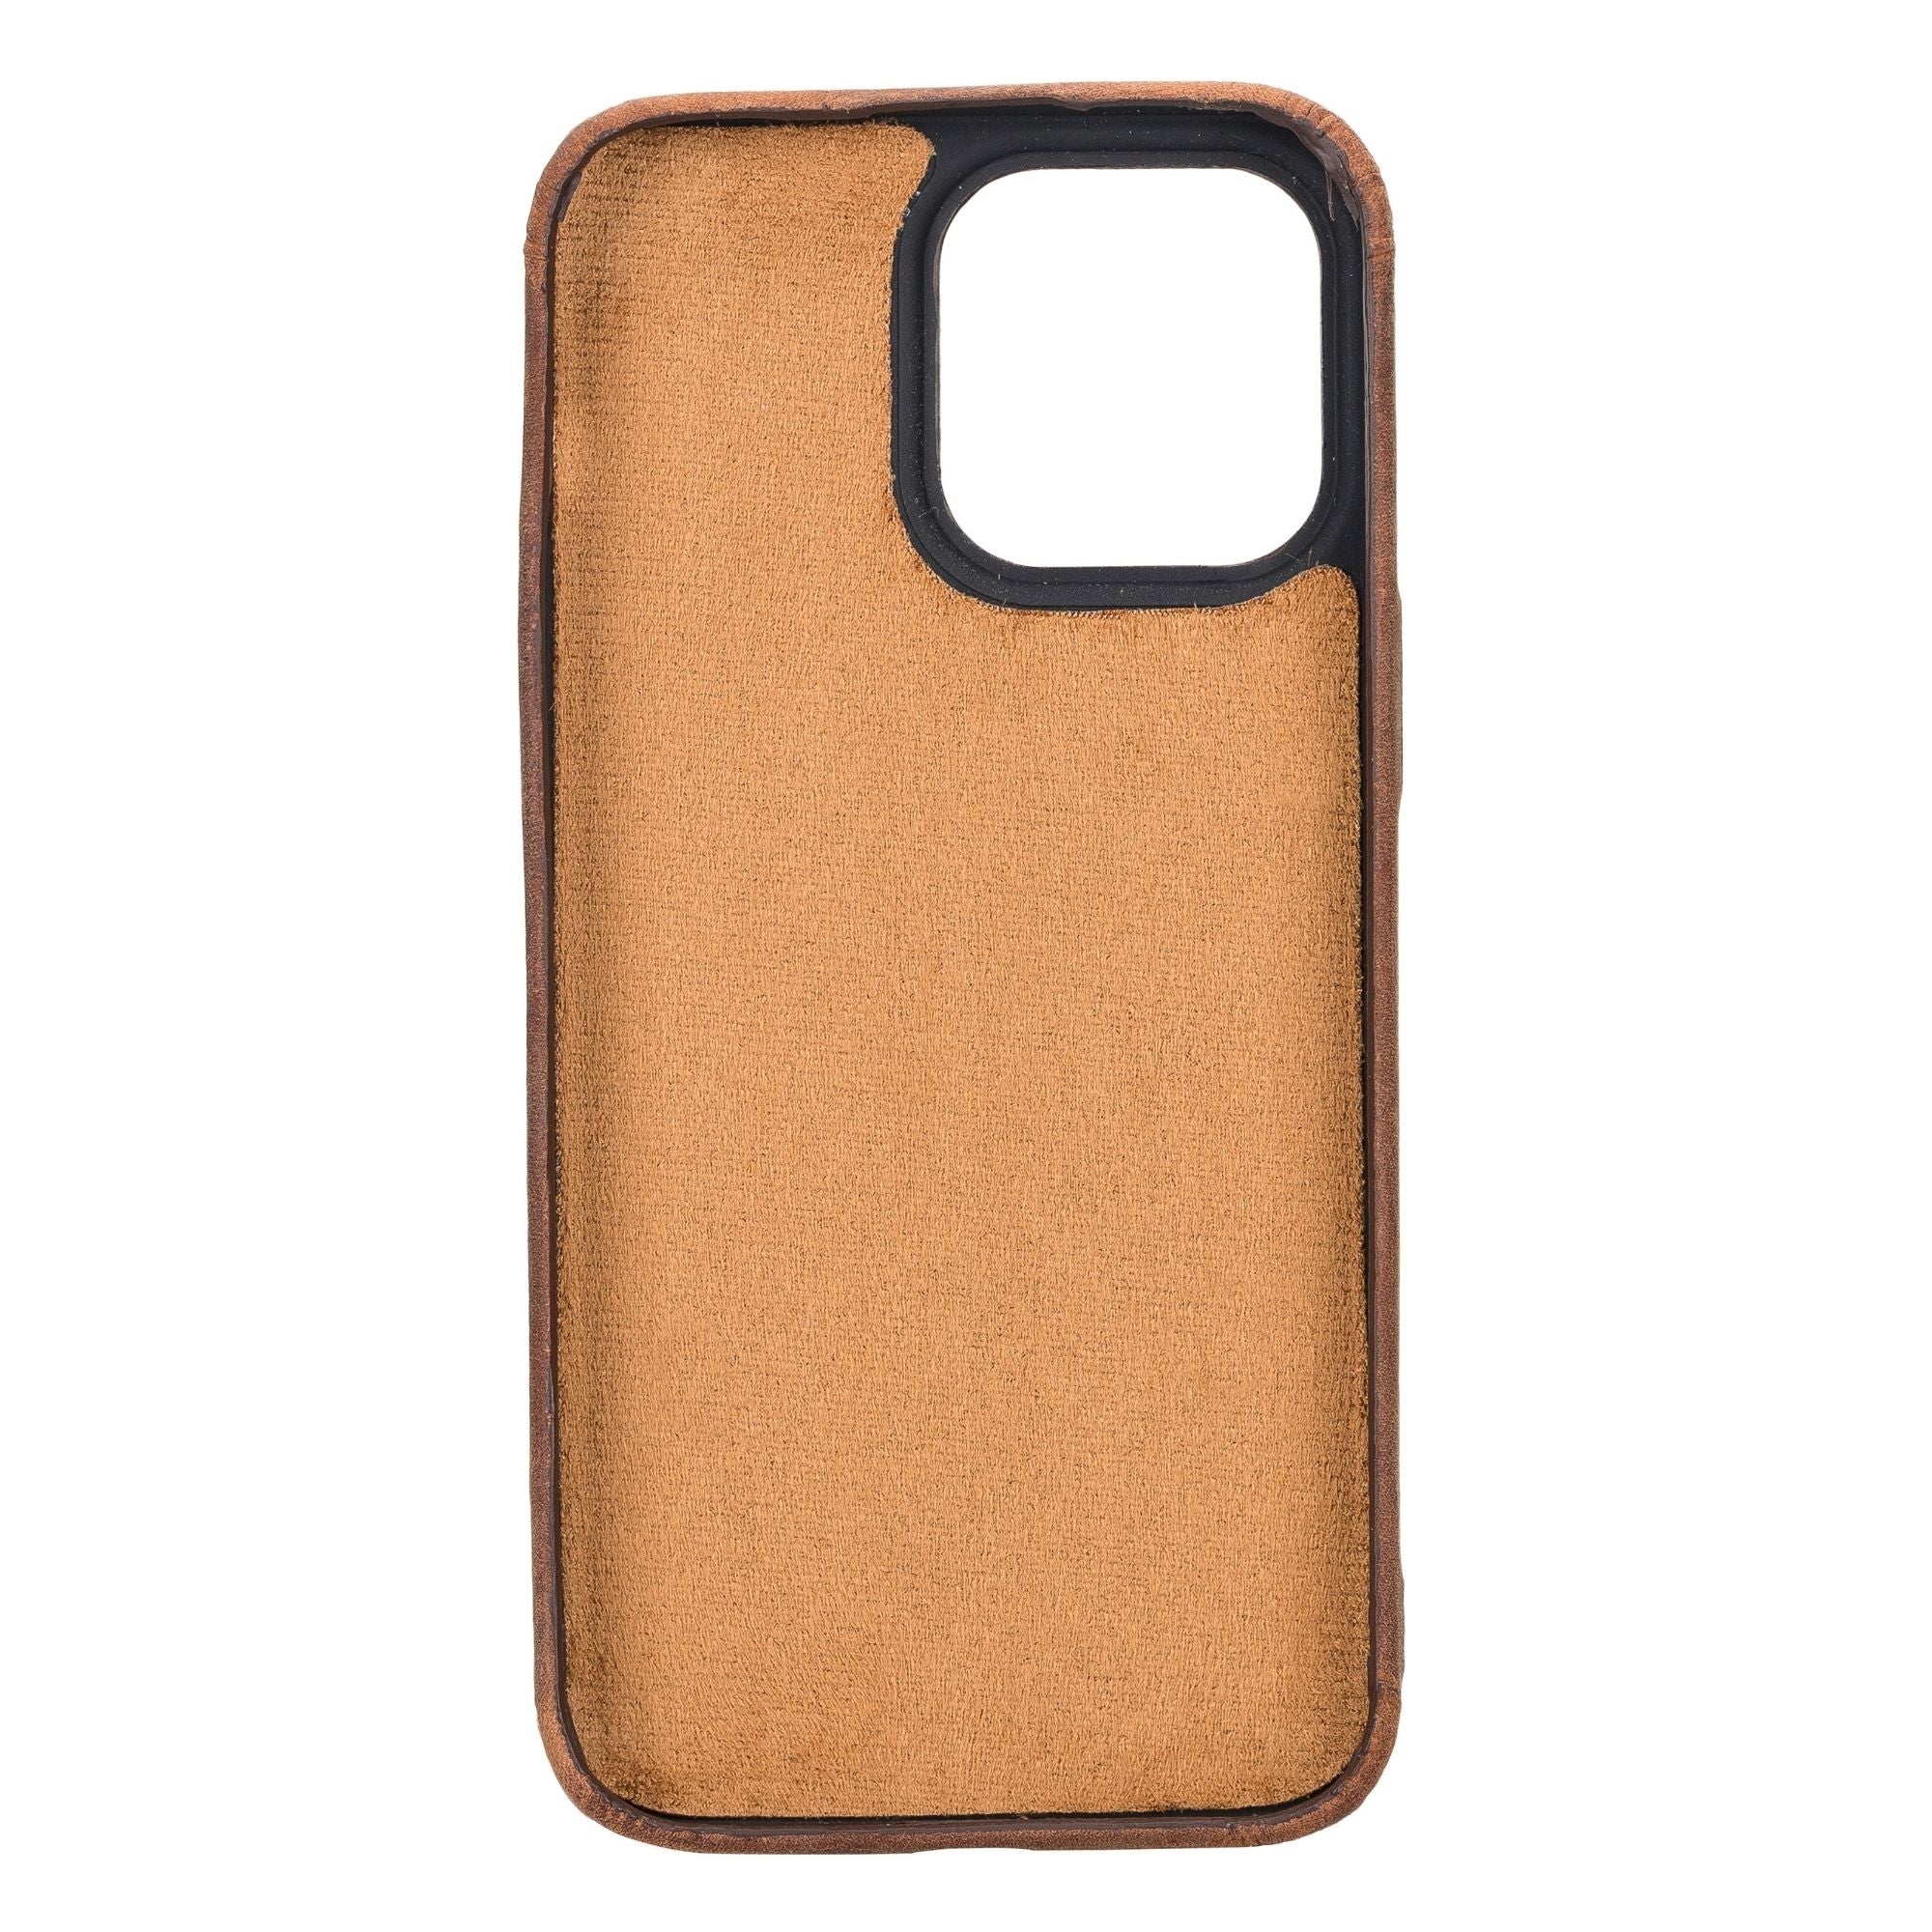 Pinedale Leather Snap-on Case for iPhone 11 Series - iPhone 11 Pro Max - Dark Brown - TORONATA